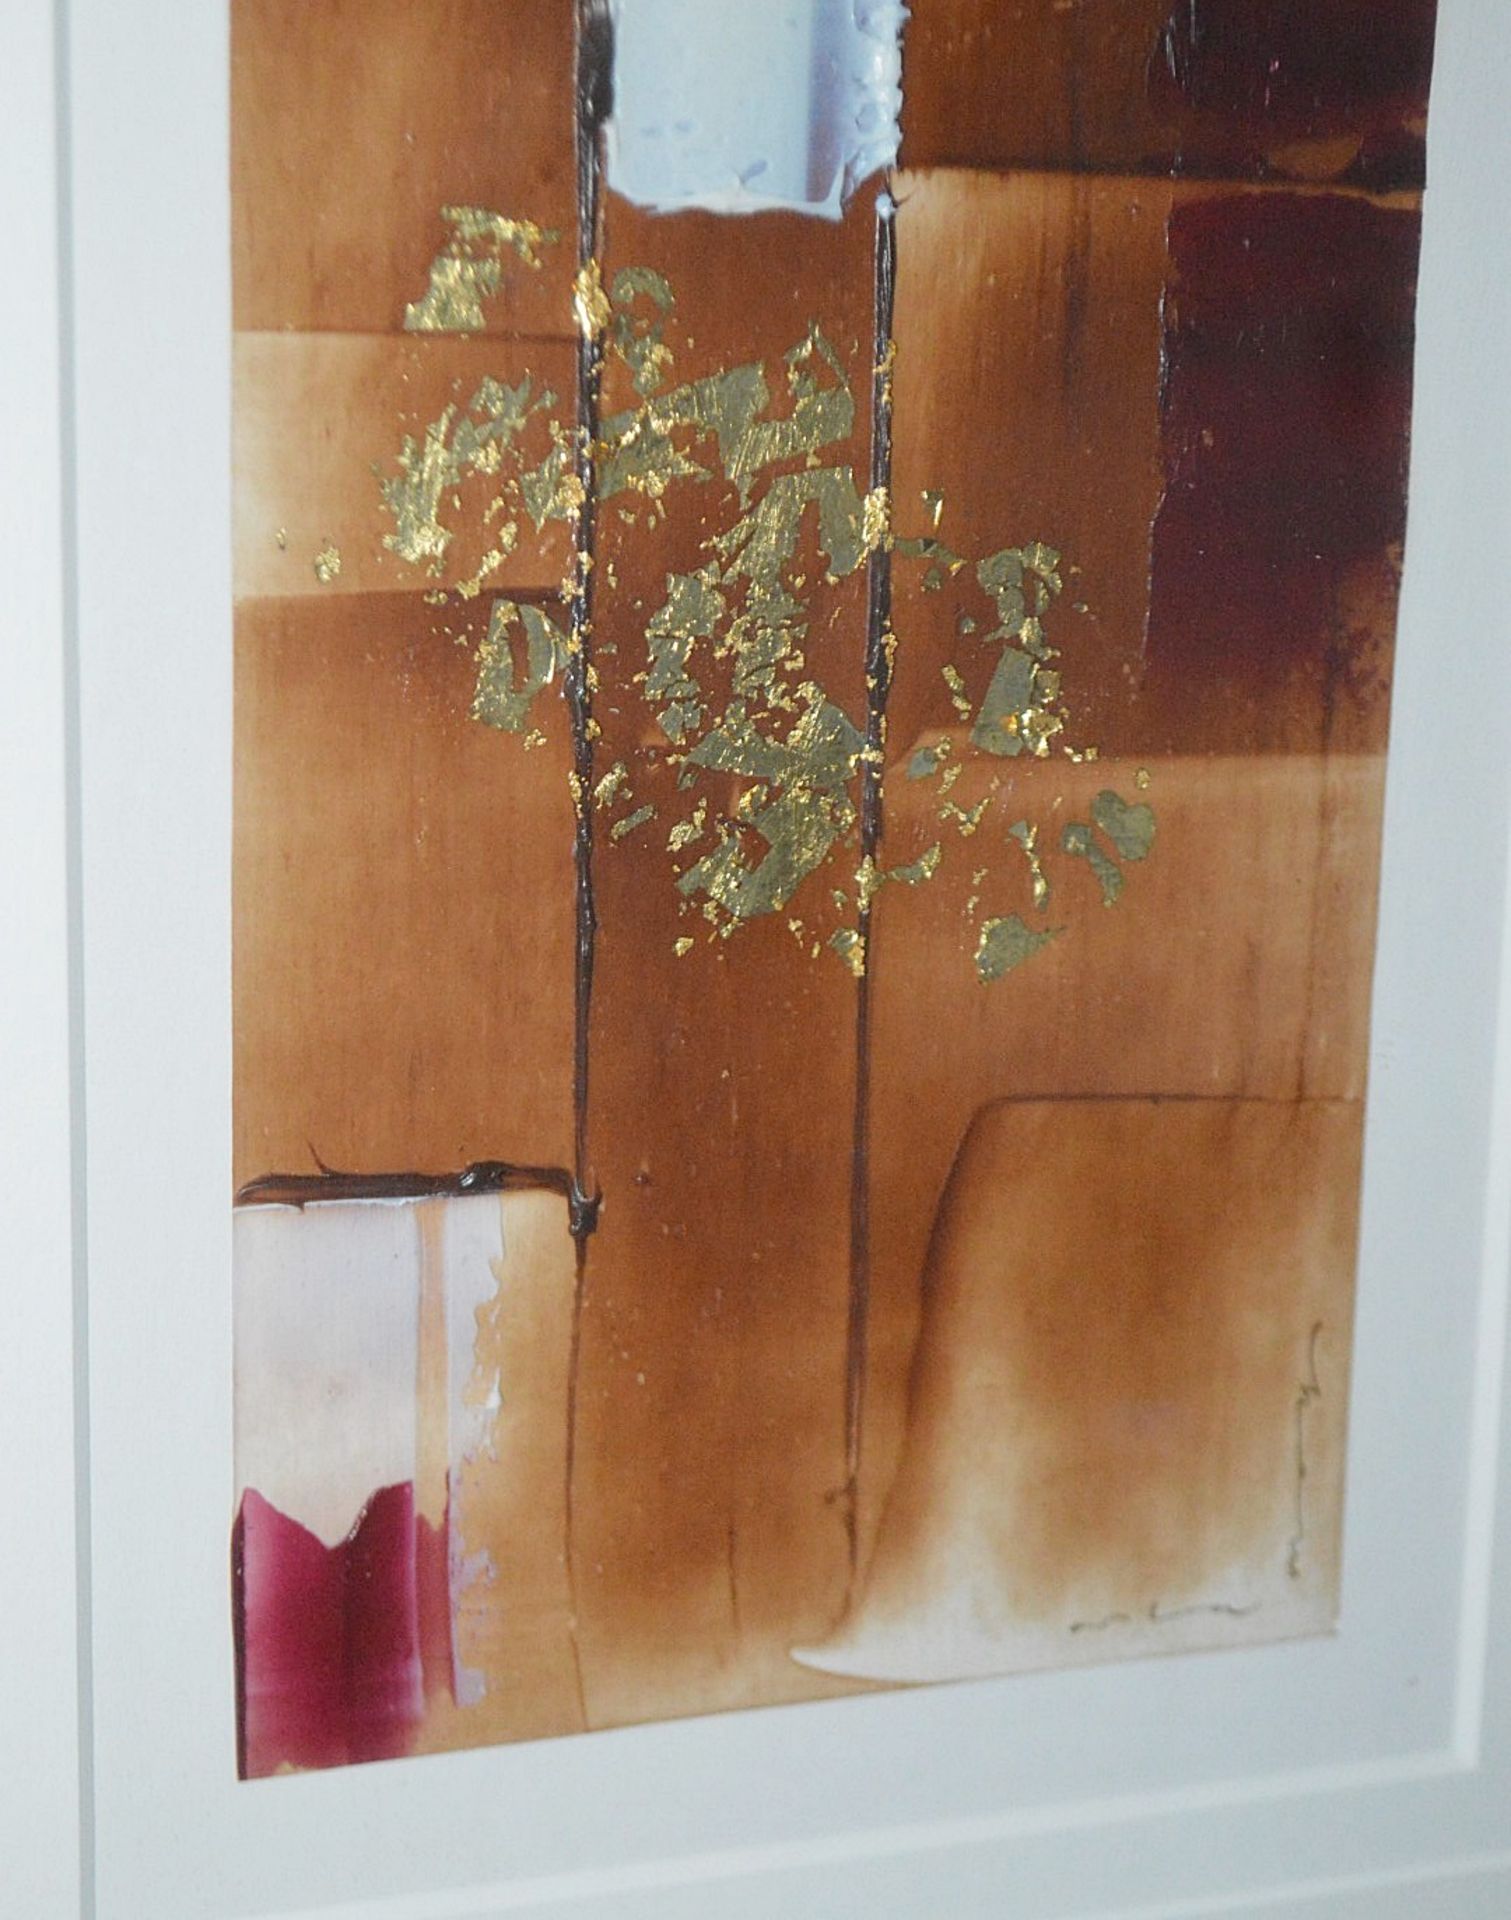 1 x Framed Original Mixed Media Oblong-Shaped Artwork By Orla May In Brown & Gold - Image 6 of 6